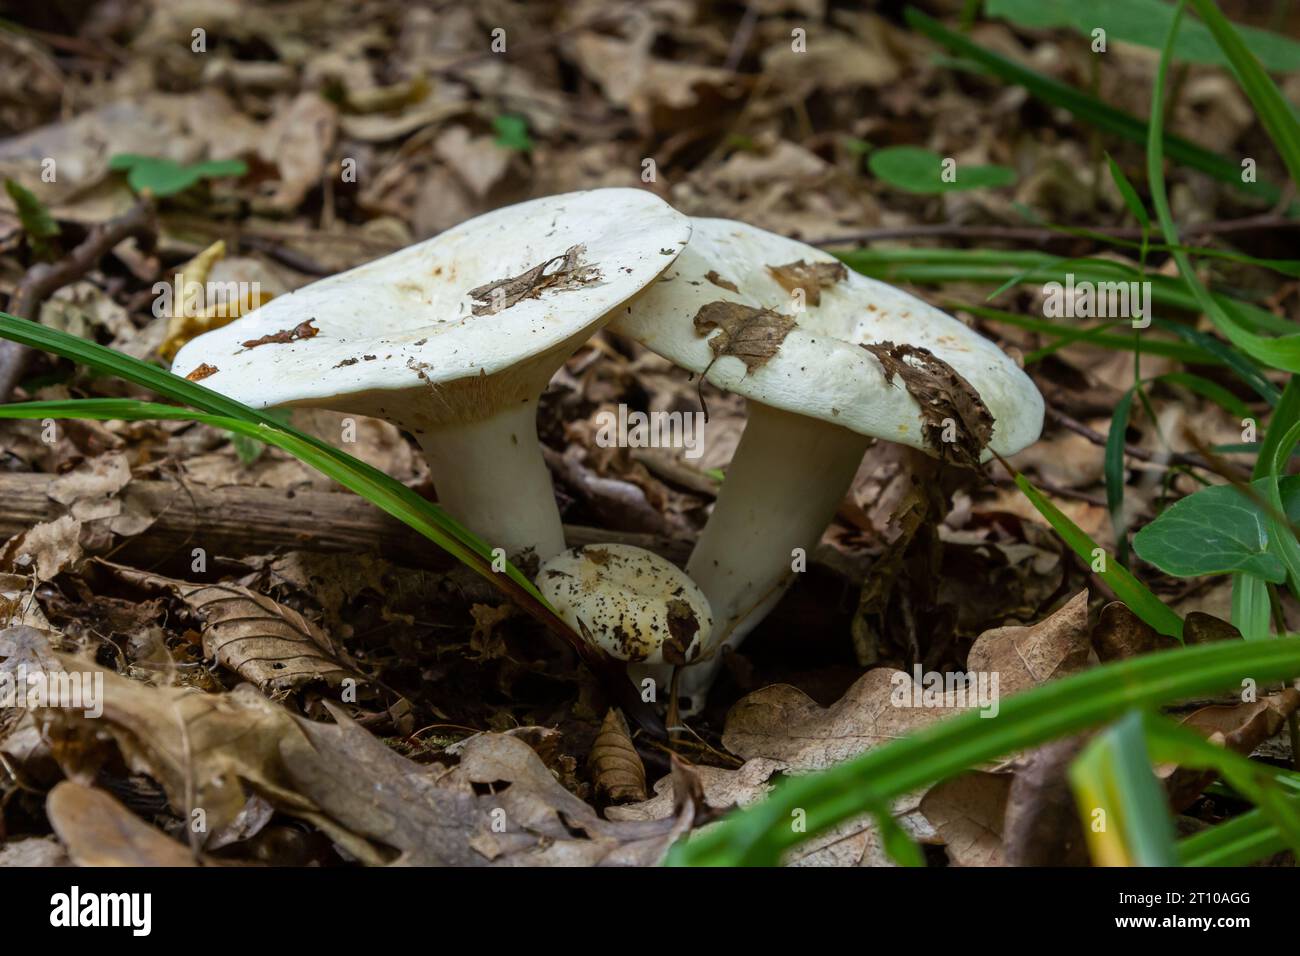 Lactarius vellereus or Lactarius piperatus is large white gilled and edible mushroom with a flat cap common in Europe and America. Stock Photo